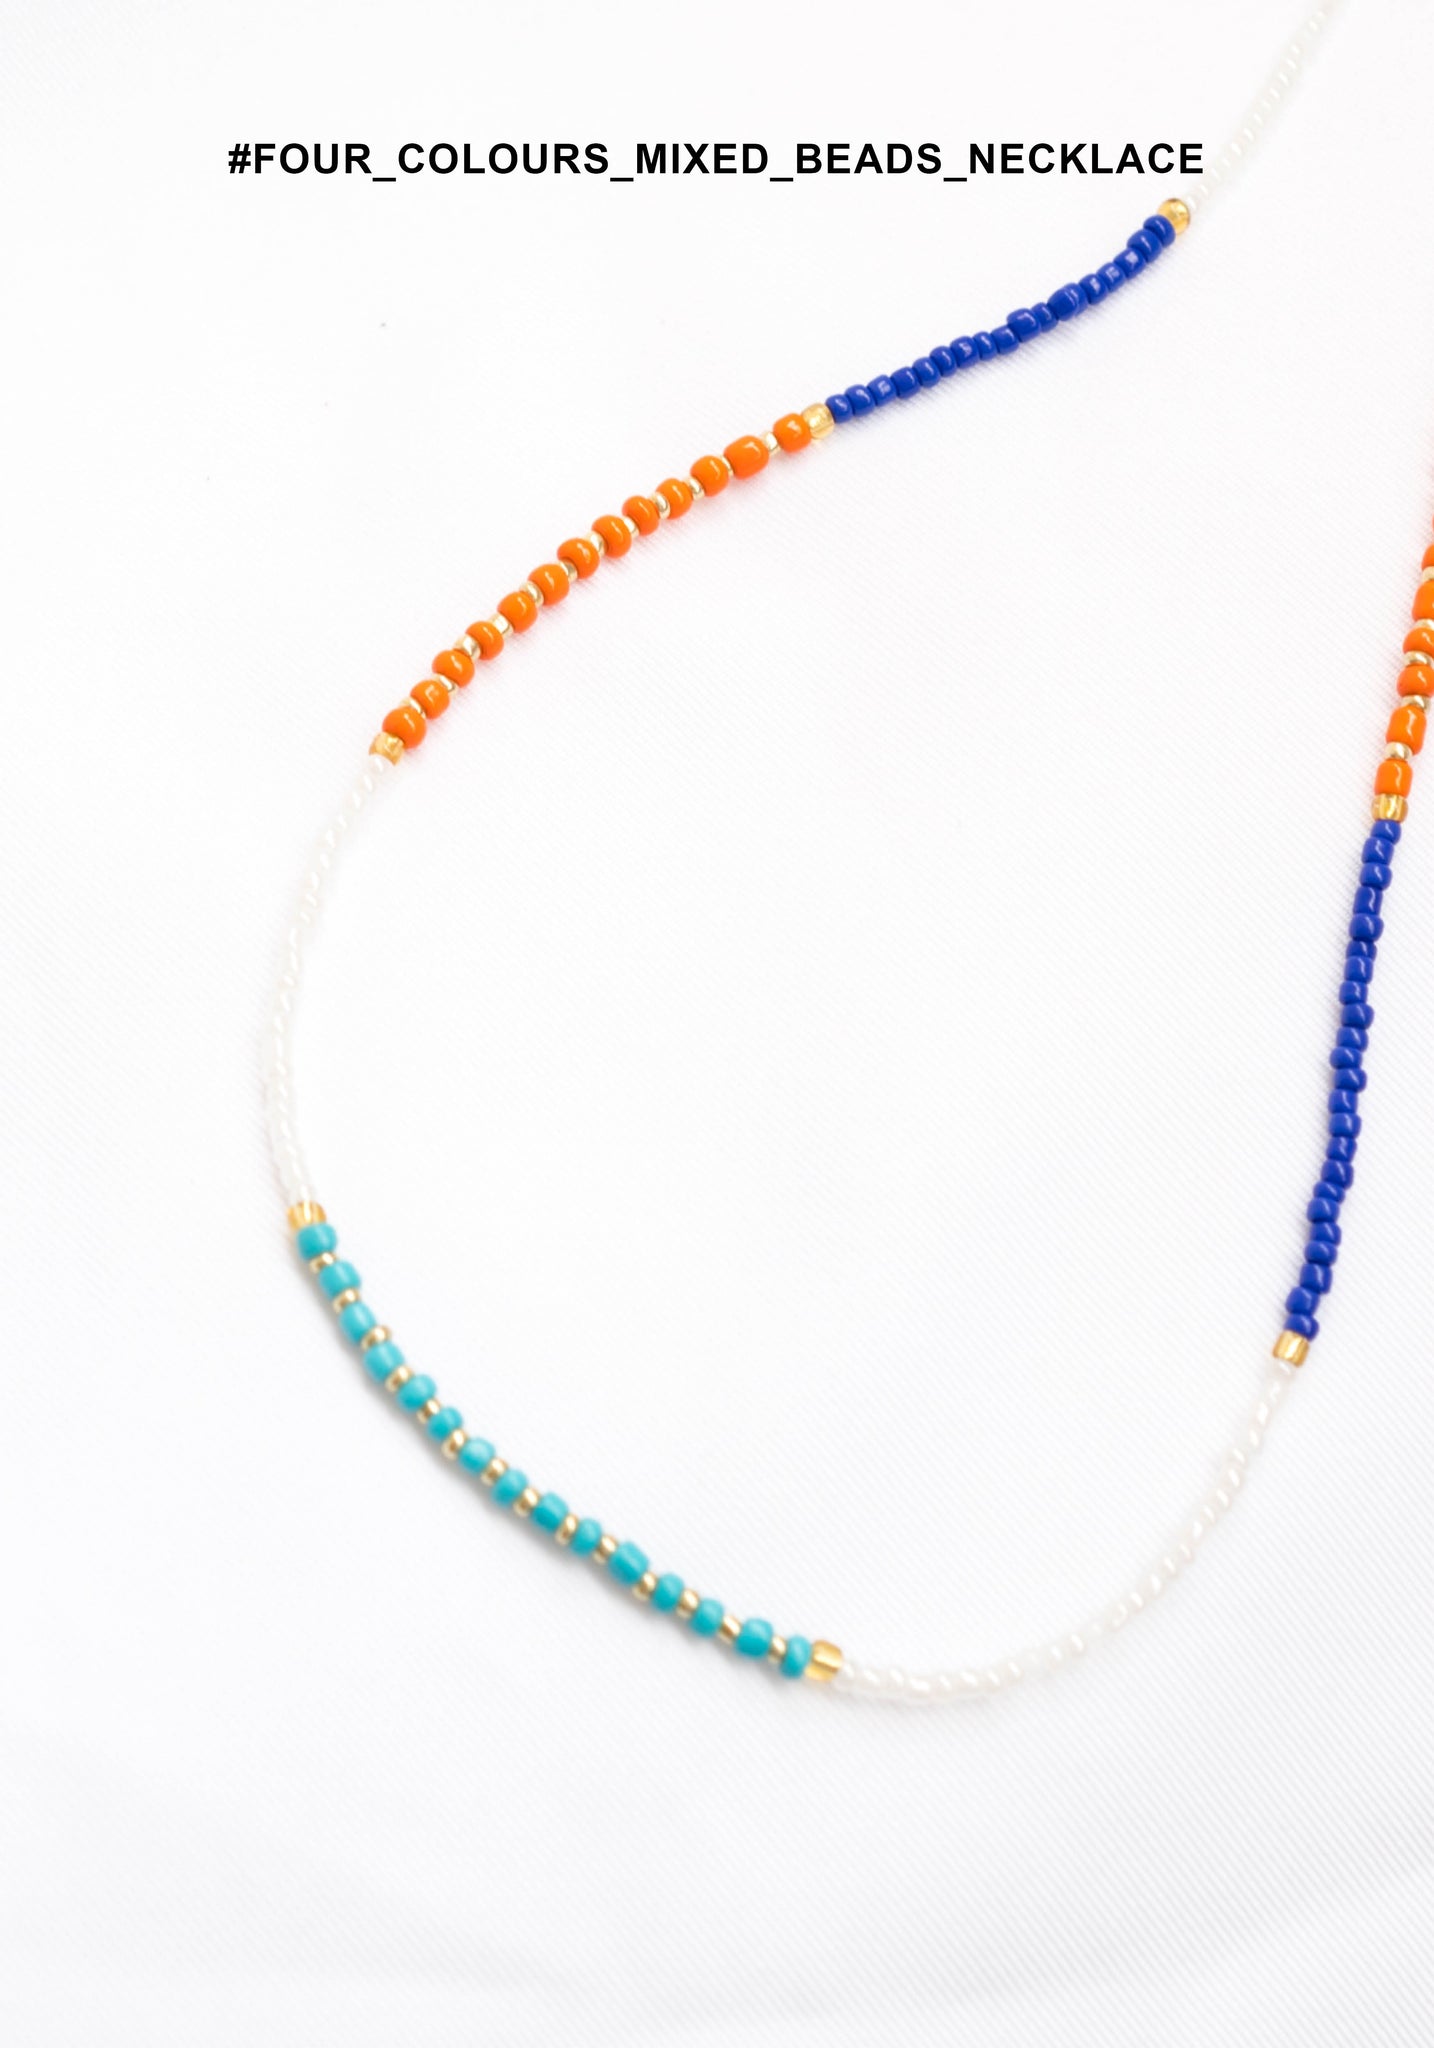 Four Colours Mixed Beads Necklace - whoami